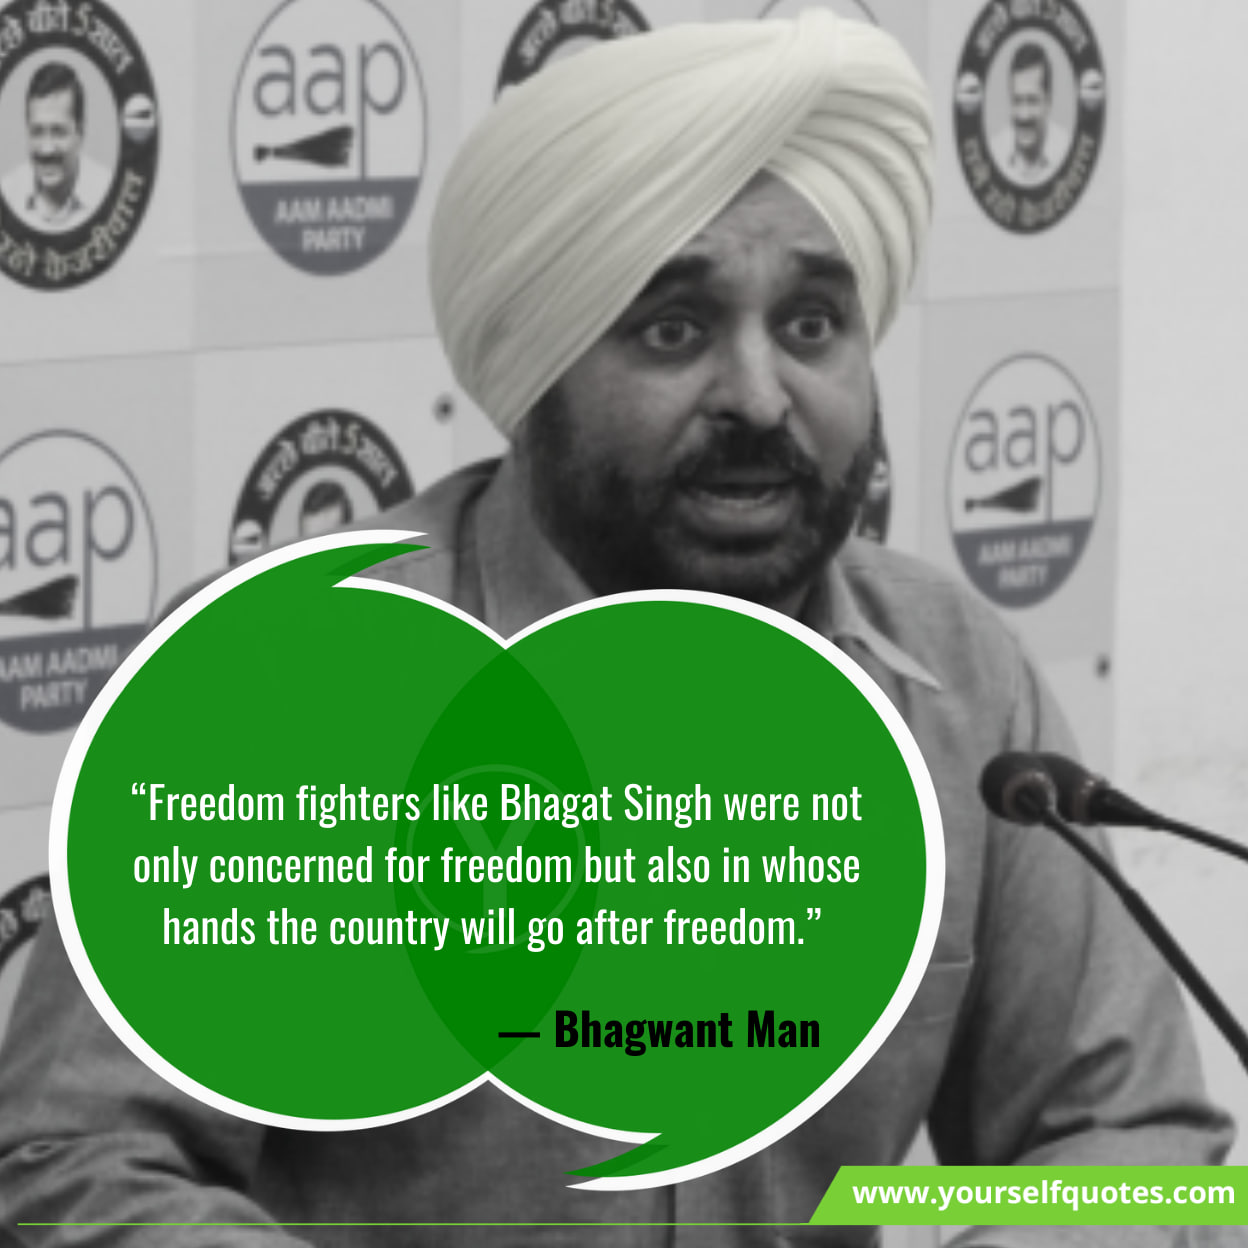 Bhagwant Mann Quotes On Freedom Fighters